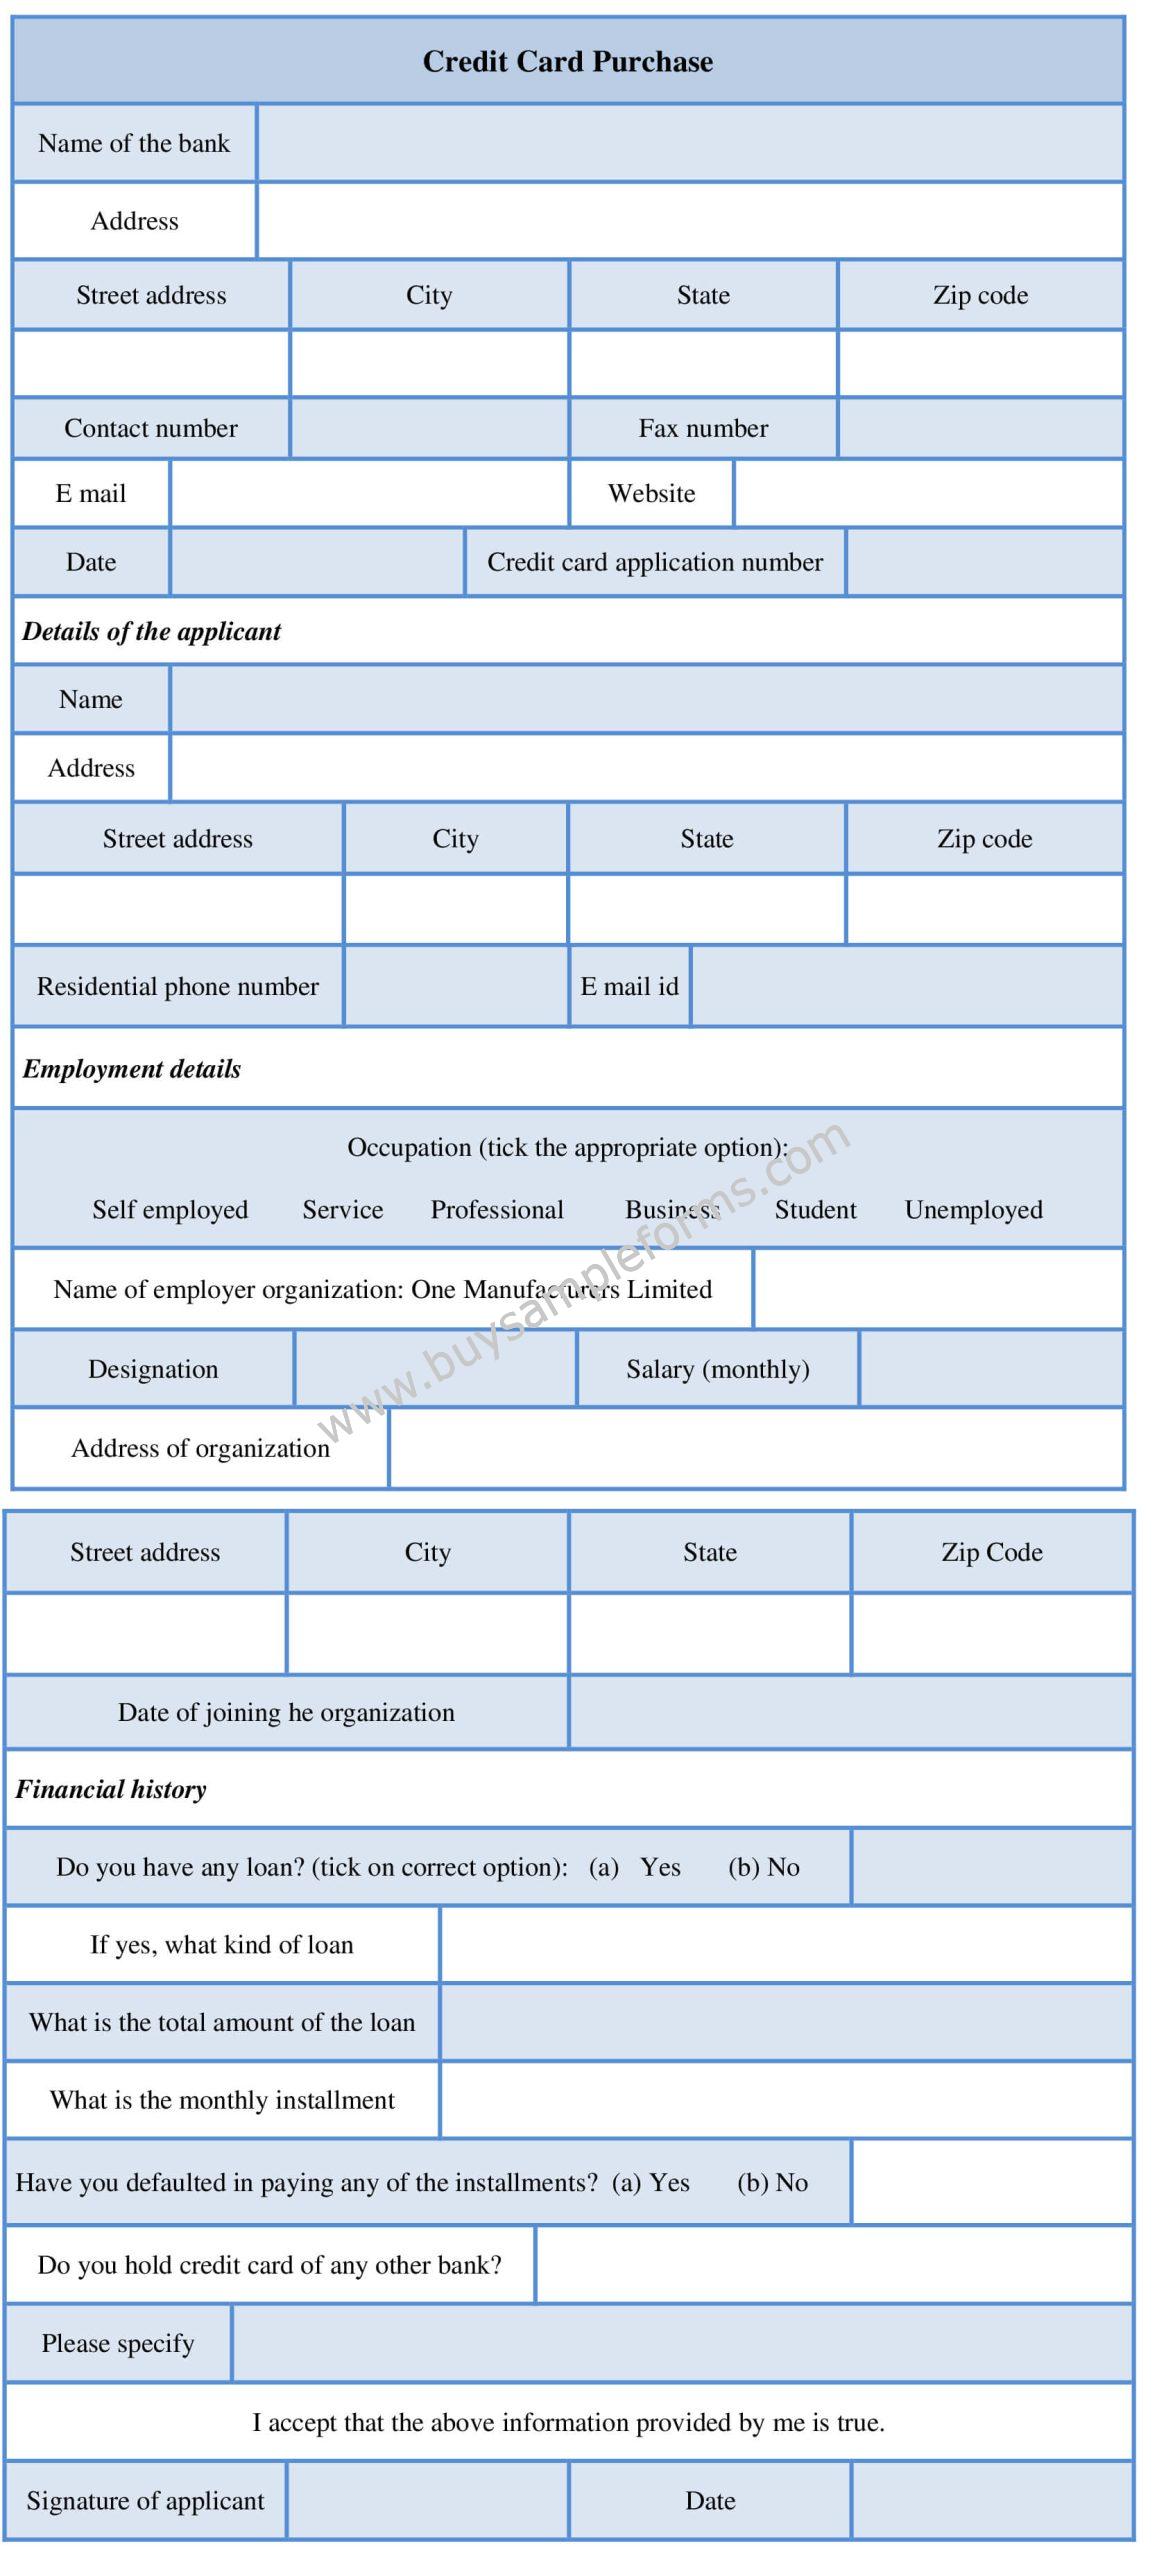 Credit Card Purchase Form Template